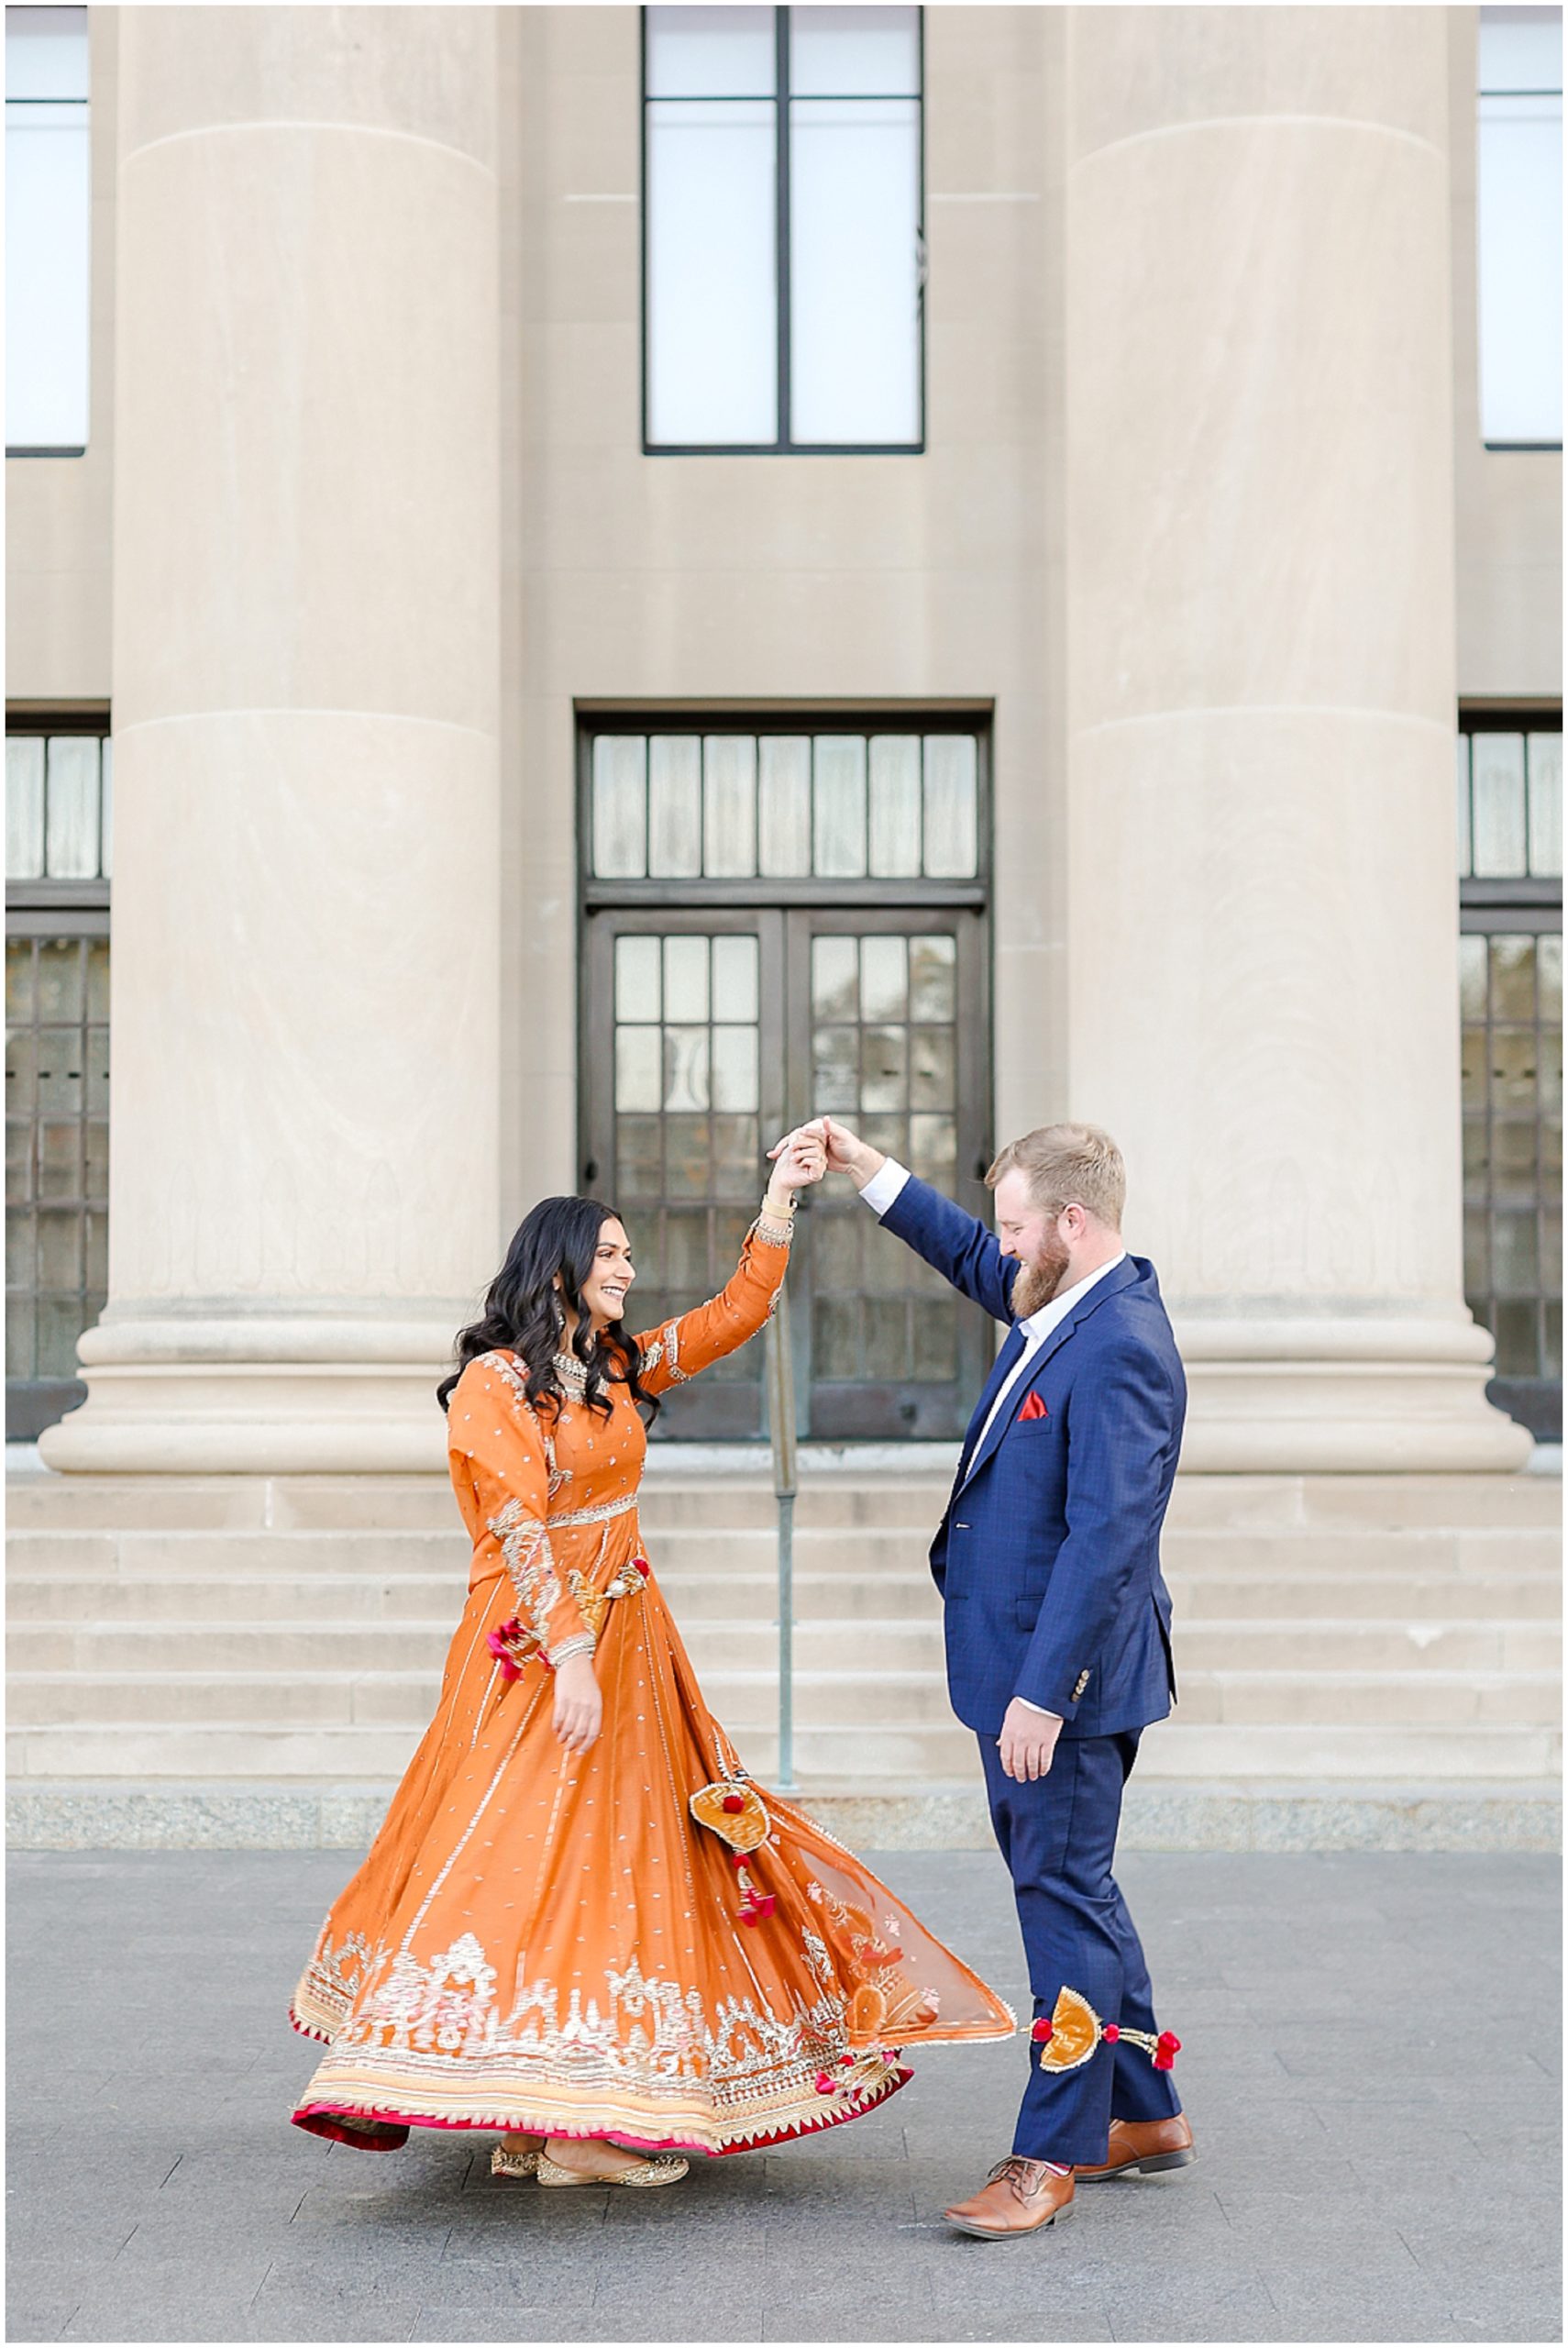 Kansas City Engagement Photographer - Mariam Saifan Photography - Where to Take Photos in Kansas - Indian Wedding - Bardot - Indian Wedding Photography Kansas City - Nelson Atkins - What to Wear Engagement - Family Photographer